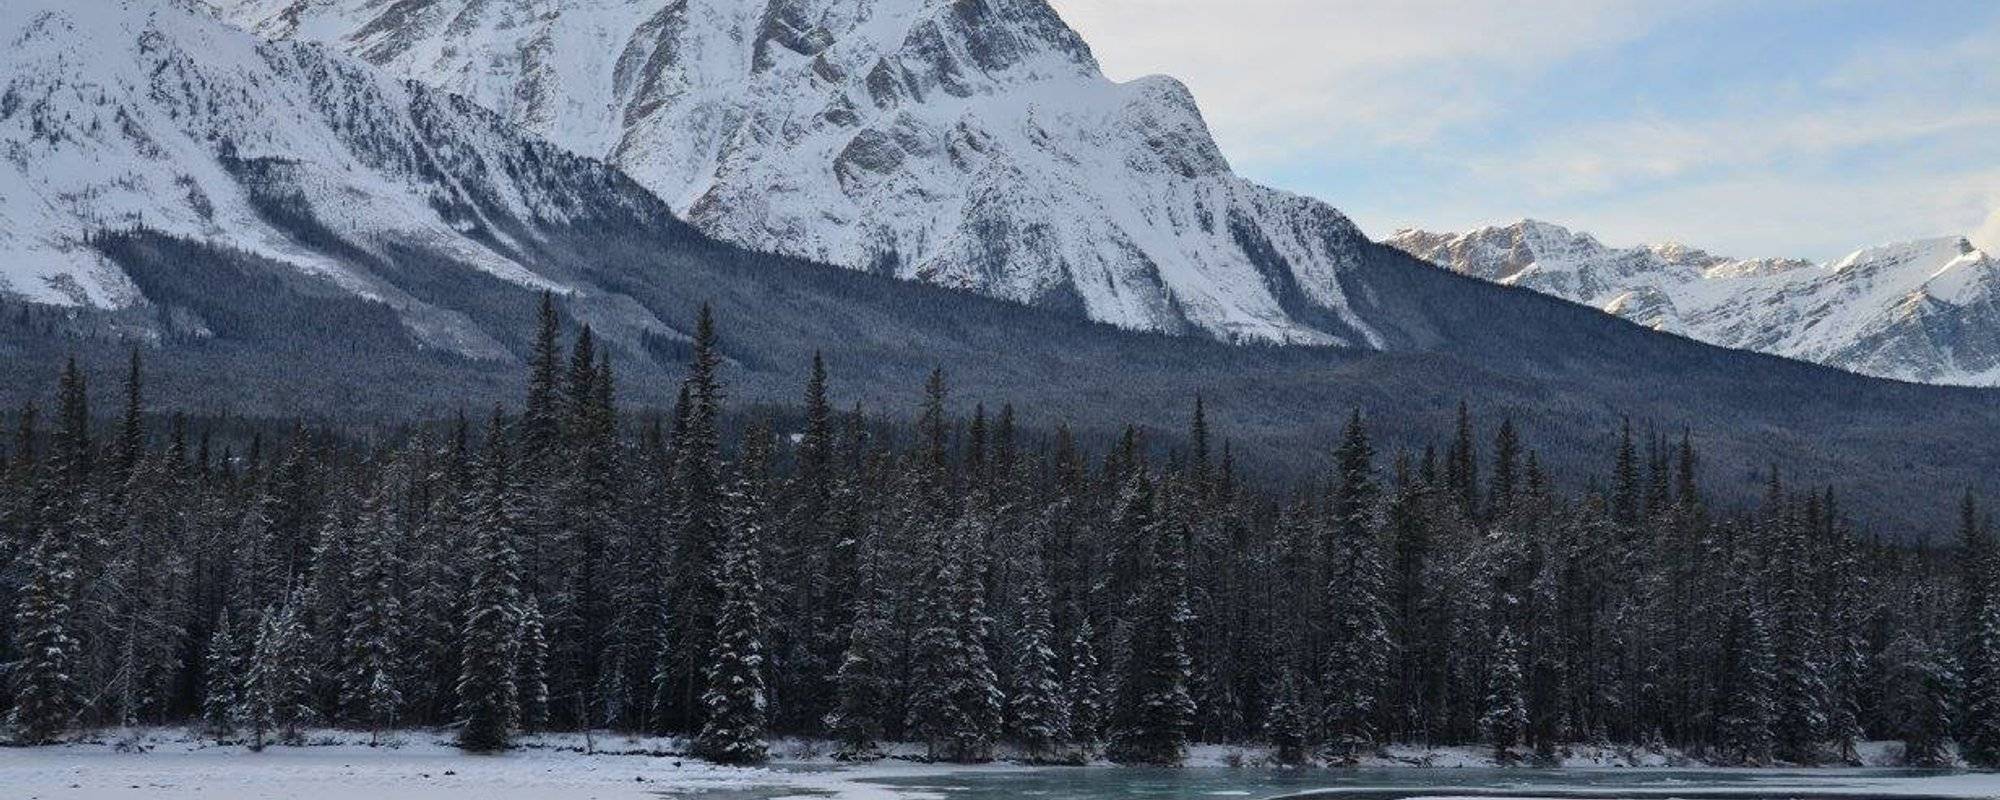 Picking a Jasper winter itinerary, chasing the views and experiences